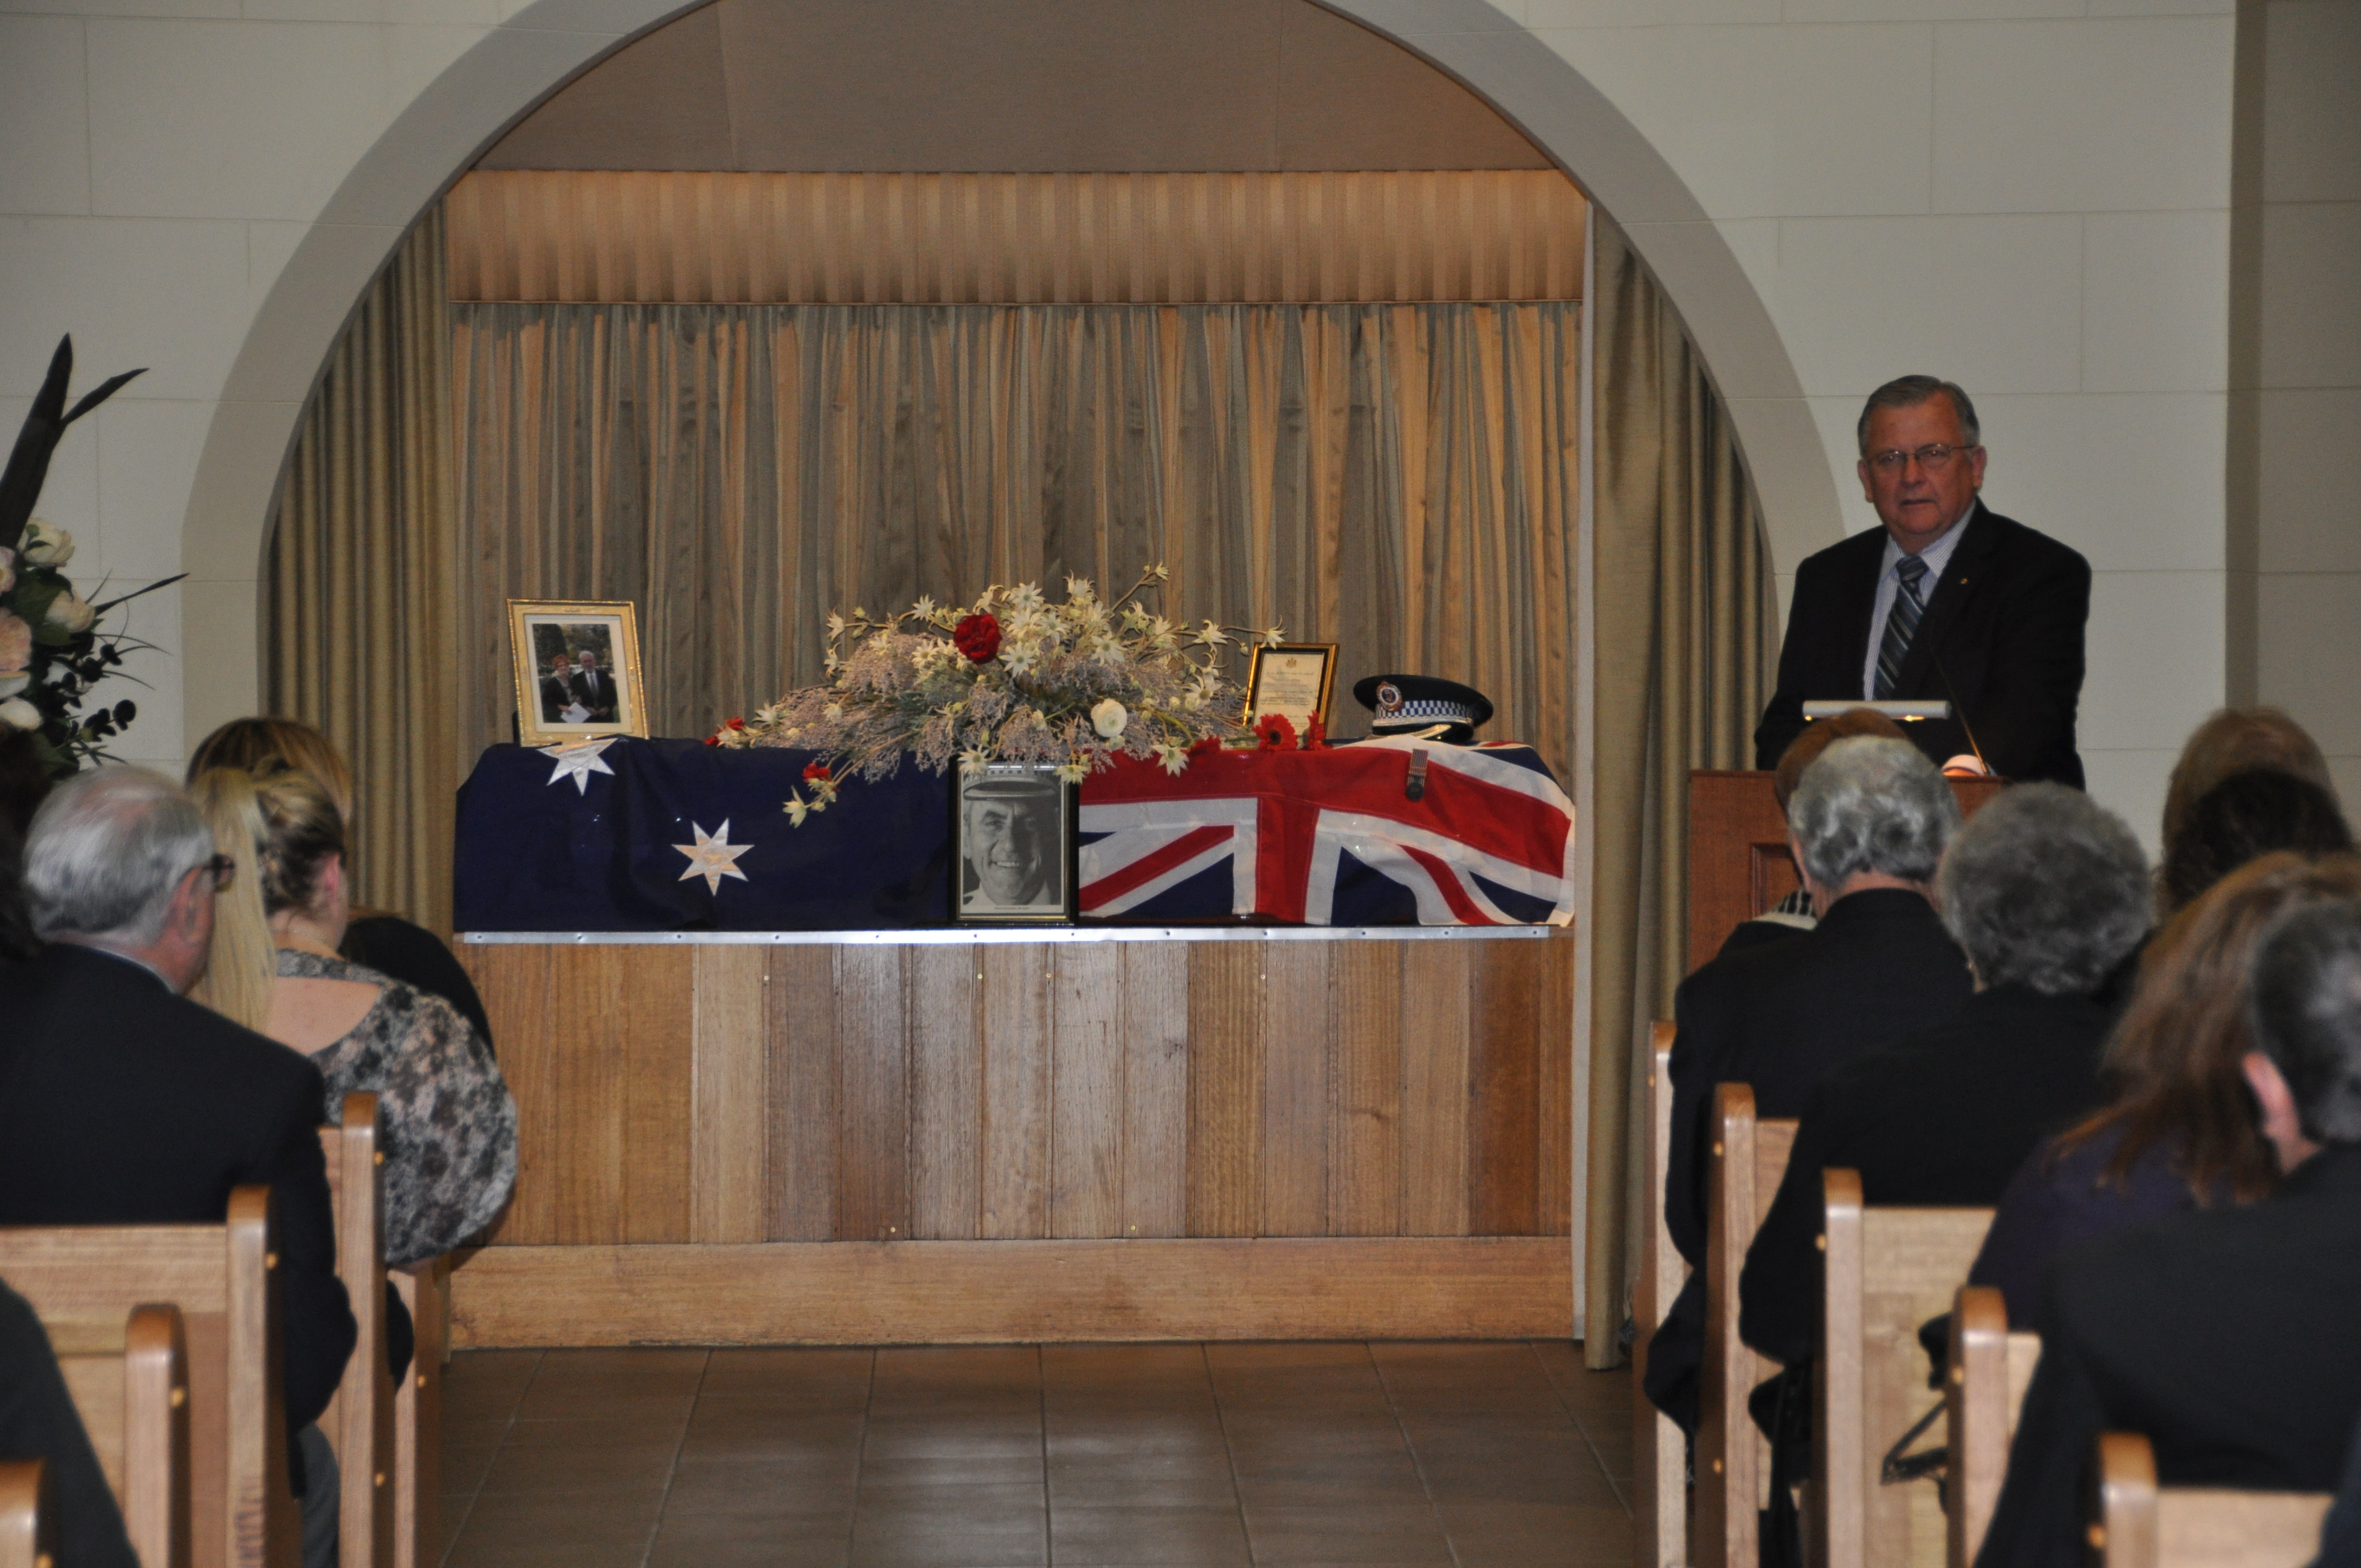 WEDNESDAY 28 SEPTEMBER 2011 CREMATION CEREMONY FOR RETIRED CHIEF INSPECTOR WILLIAM 'BILL' LEONARD ESPIE. Born 250635 - 220911 SERVICE AT THE SOUTH CHAPEL, ROOKWOOD CREMATORIUM, ROOKWOOD, 10.30AM. POLICE FUNERAL. I WORKED WITH BILL AT CABRAMATTA / FAIRFIELD / 34 DIVISION POLICE AROUND THE 1977 ERA. RETIRED POLICE COMMISSIONER KEN MORONEY GIVING THE EULOGY. Bastion of culture and community October 15, 2011 . Bill Espie was one of several talented Aboriginal men born in the Northern Territory in the mid- to late 1930s who went on to make, each in his own way, his mark on Australia and to contribute to the progress of his people. Espie was the first, destined for an exemplary police career in which he became the highest-ranking police officer of Aboriginal descent in all the Australian police forces. He was followed by Charlie Perkins, who became a famous activist; Professor Gordon Briscoe, an academic and activist for his people; the artist John Moriarty; Vince Copley, chairman of Indigenous Cricket; and Brian Butler, in Aboriginal aged care. William Leonard Espie was born in Alice Springs on June 25, 1935, one of seven children to a mixed-race Arunta woman, Edith Espie, who was part of the stolen generation, and Victor Cook, a European who had moved from South Australia to work in Alice Springs as a labourer. Espie's sister Ellen said the family lived in a good house in Alice Springs and their parents did their best for them. Like Perkins and Briscoe and several others, Espie came under the benign influence of an Anglican priest, Father Percy Smith, who arranged for the boys to go to St Francis House at Semaphore in Adelaide, an indigenous boys' home. Espie, known then as Buckshot by the boys, went to school in Port Adelaide and showed himself to be an outstanding tennis player, facing at one time Lew Hoad and Ken Rosewall. He completed his Intermediate Certificate, then trained as a maintenance fitter. In 1955, he joined the Australian Army, became a sappe